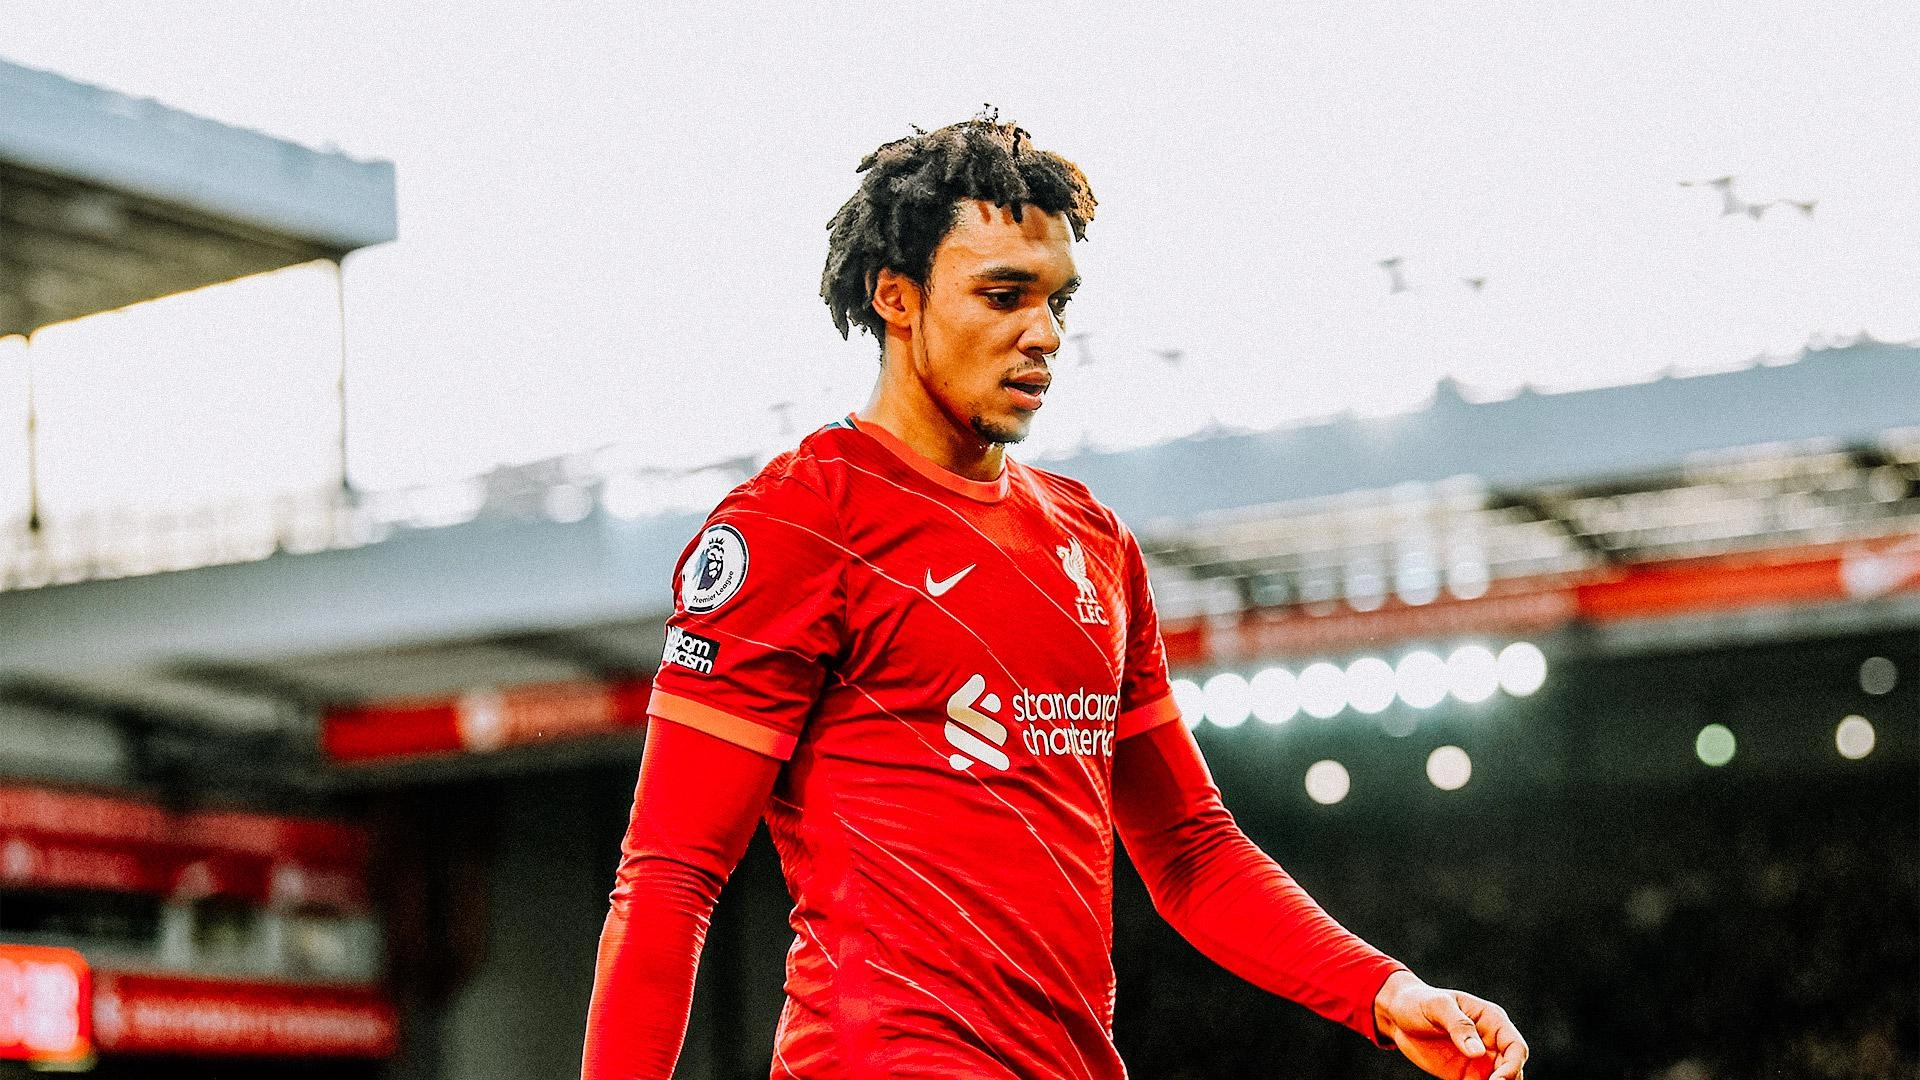 Alexander Arnold Wallpaper Discover more Alexander Arnold EPL Liverpool  TAA Trent A  Liverpool football club wallpapers Liverpool champions  Liverpool soccer